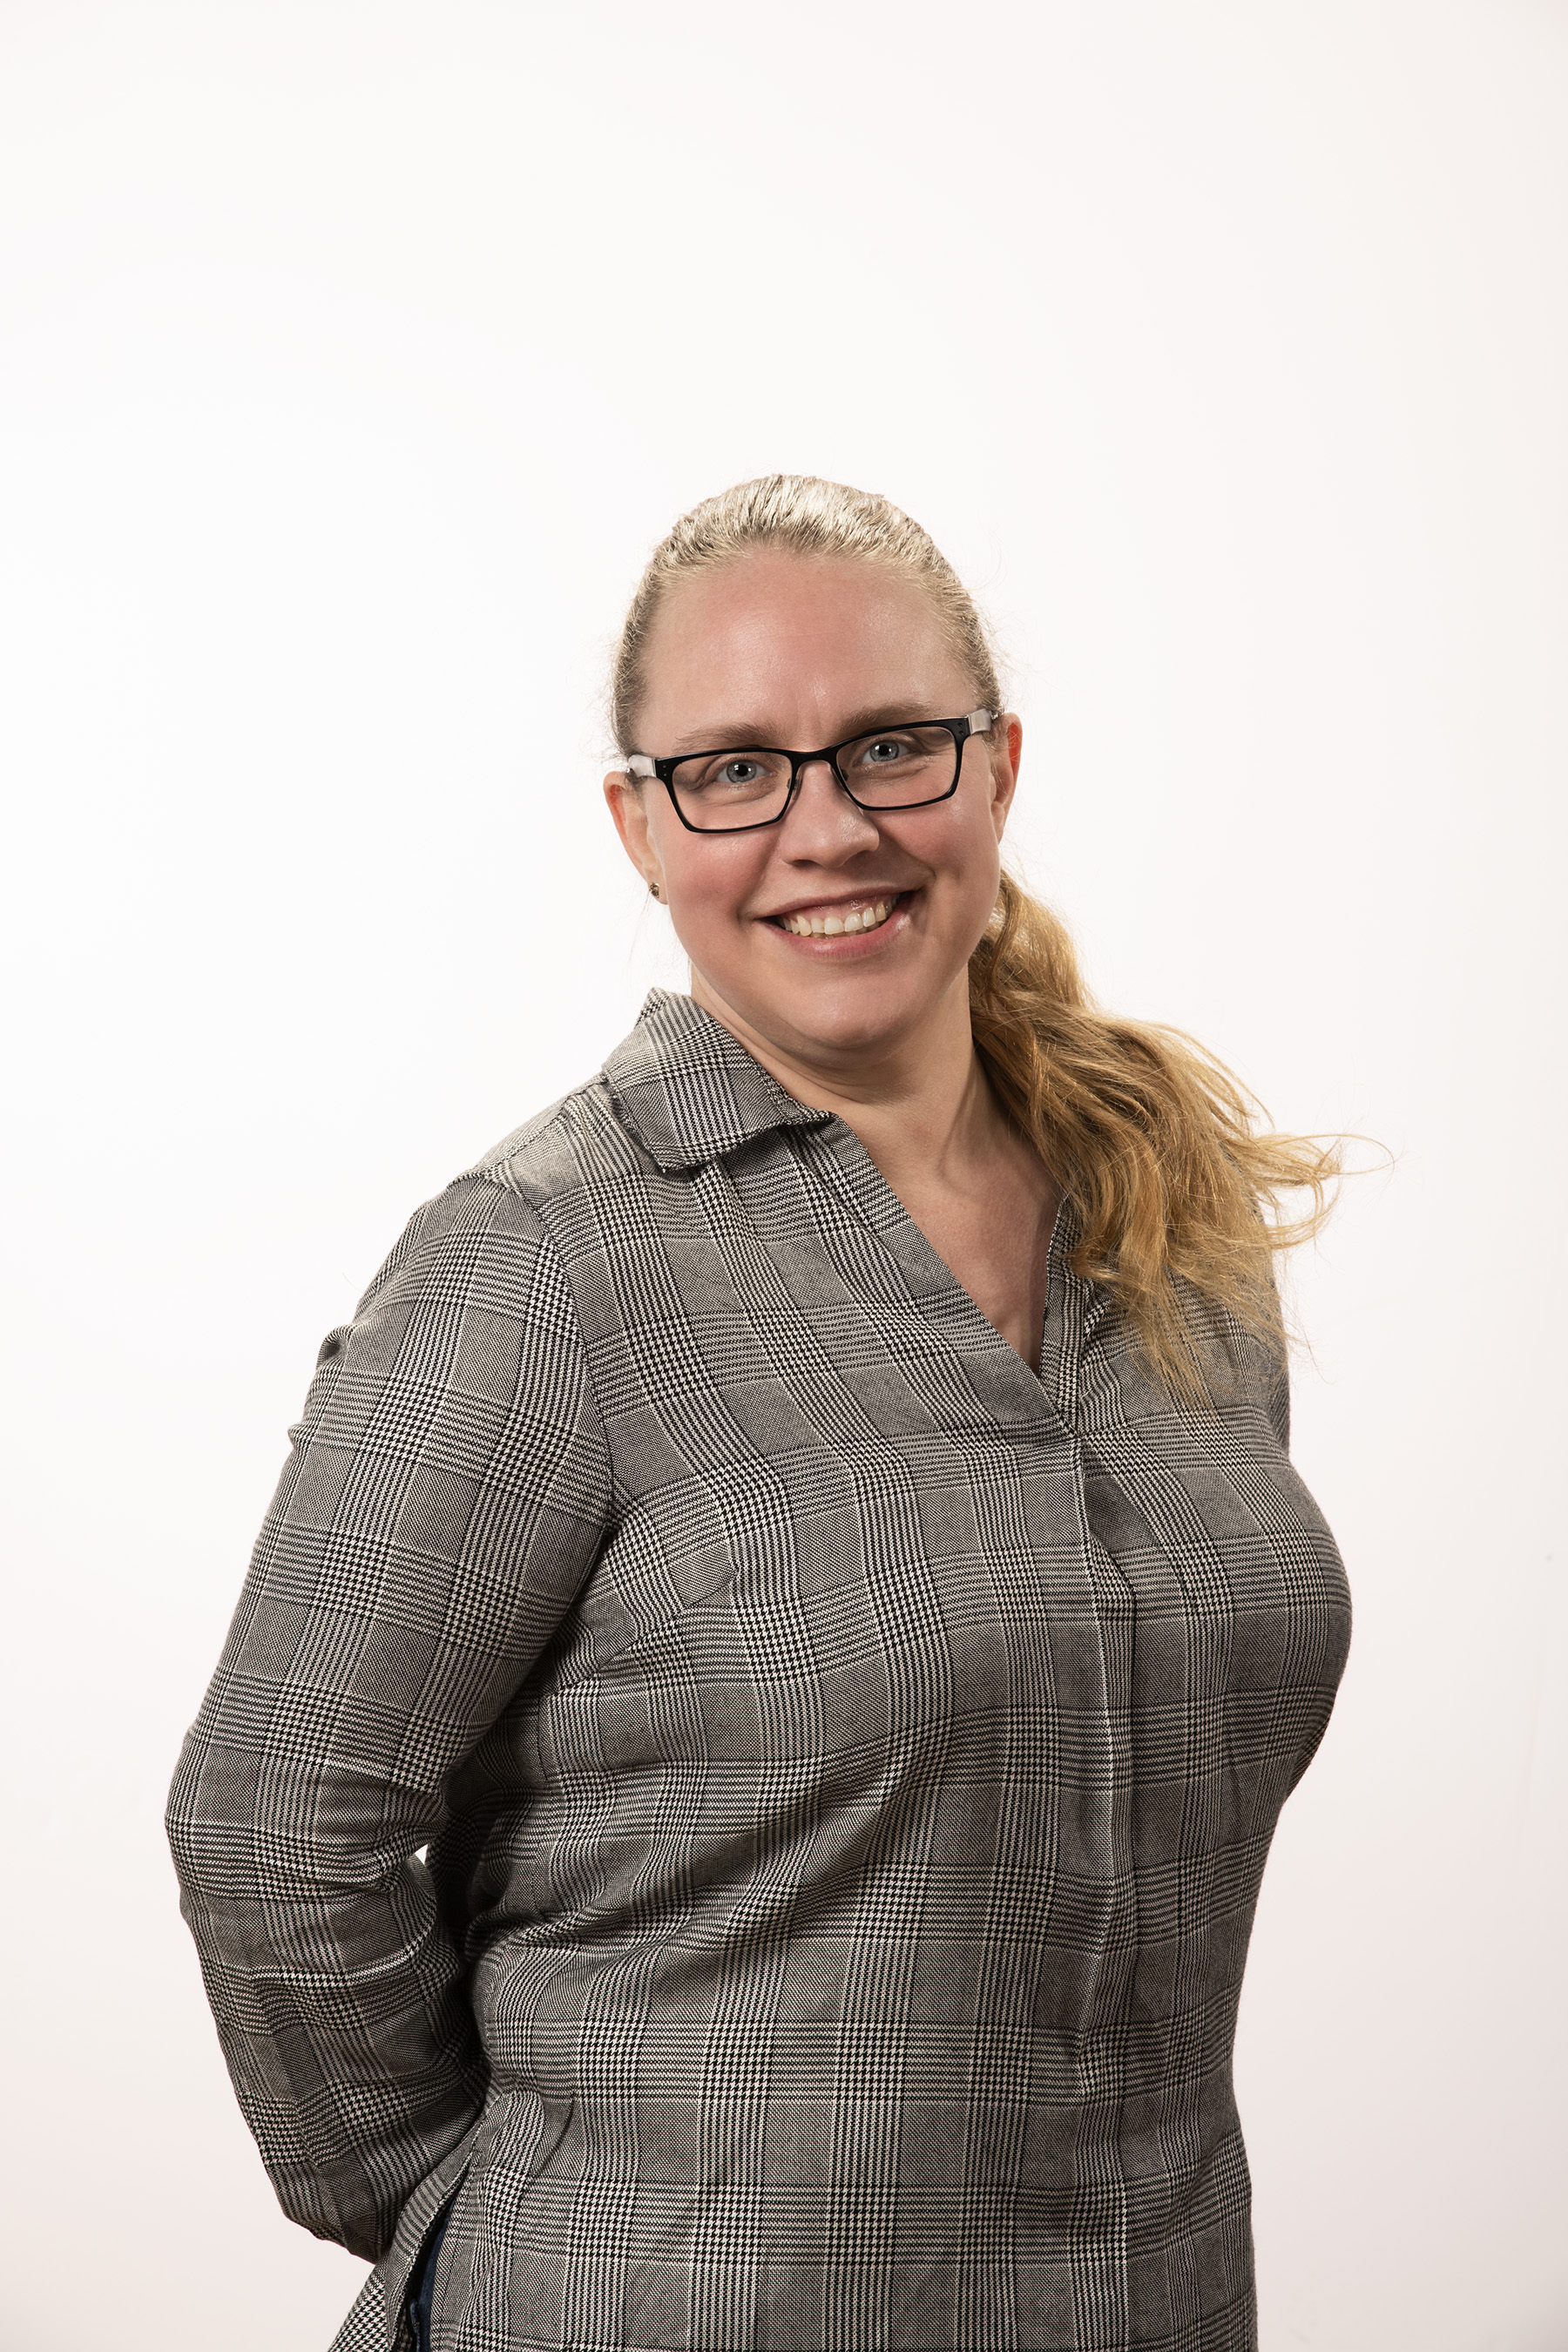 A professional headshot of Chantelle Painter. She is wearing glasses and business casual attire. She smiles while standing against a white background